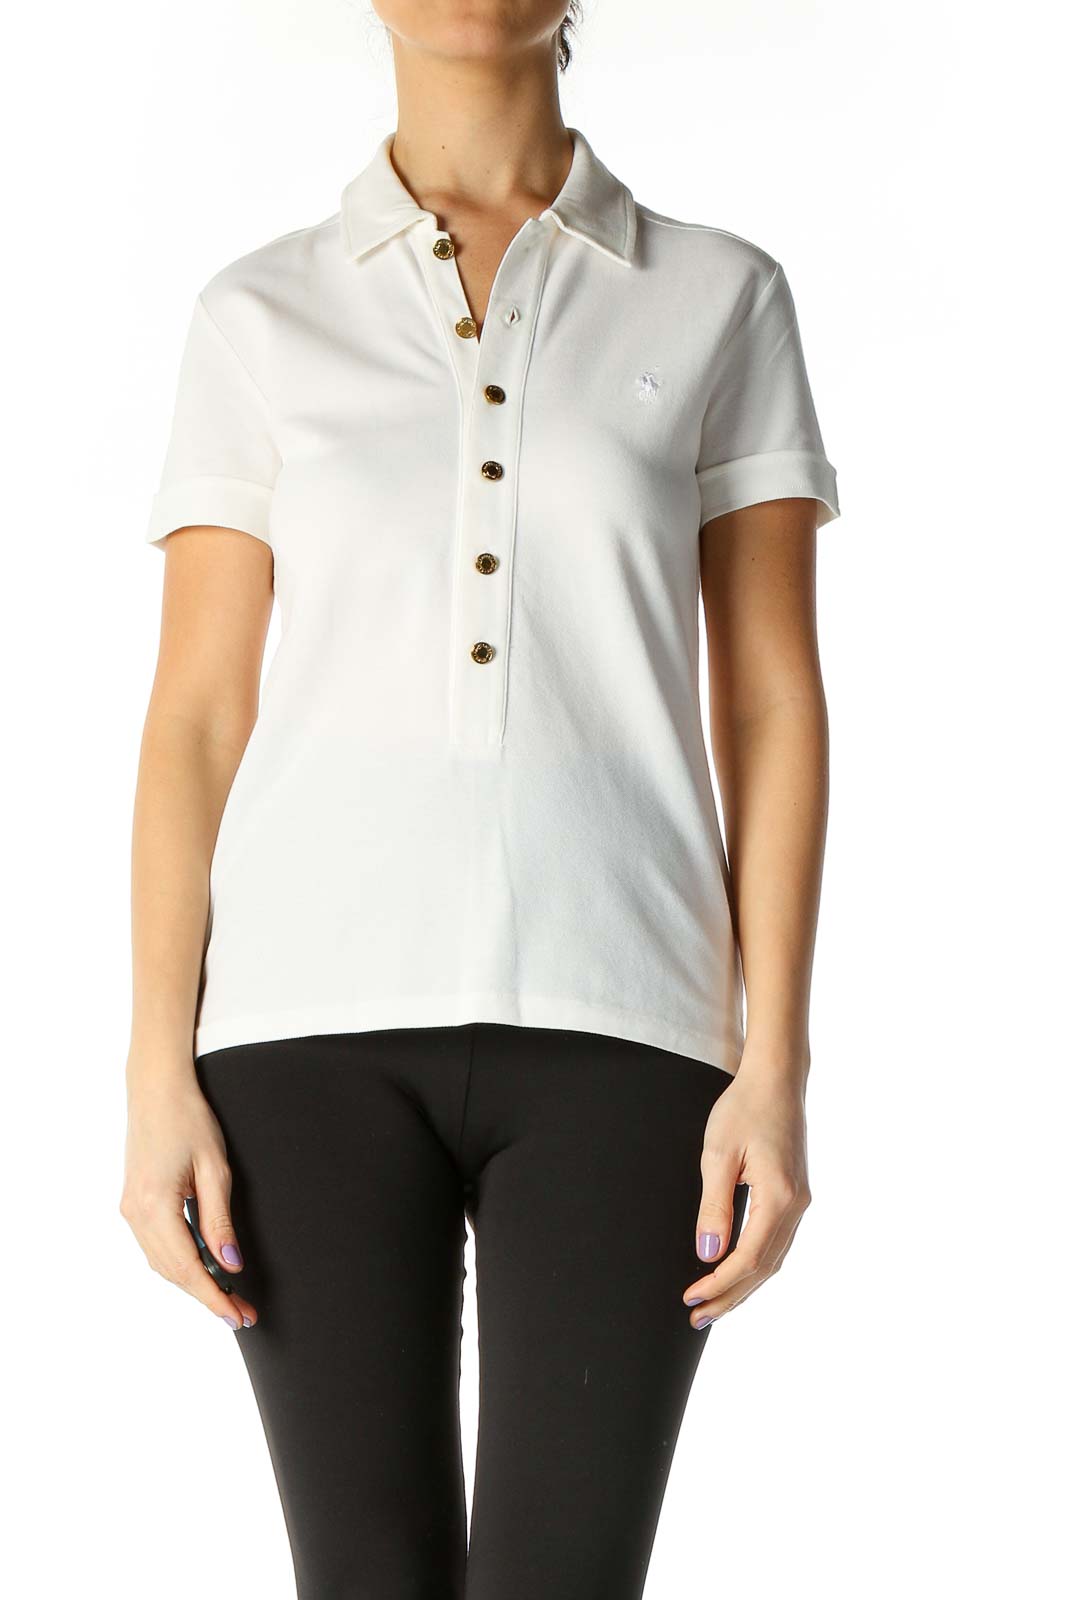 White Solid Casual Shirt Front